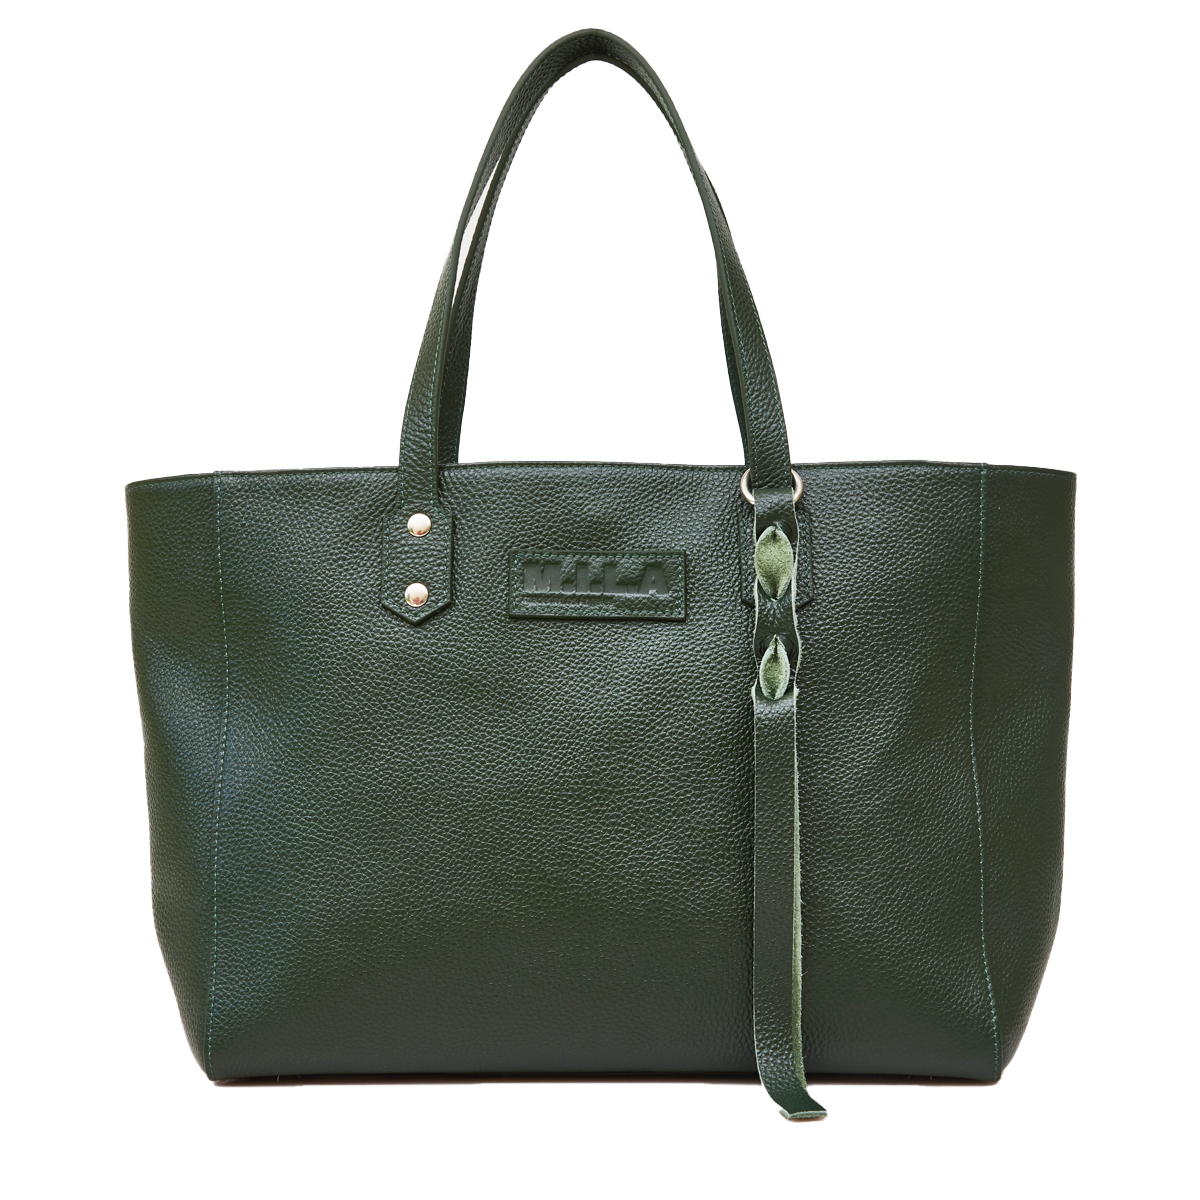 Chic leather tote, Gallery posted by minimallyso